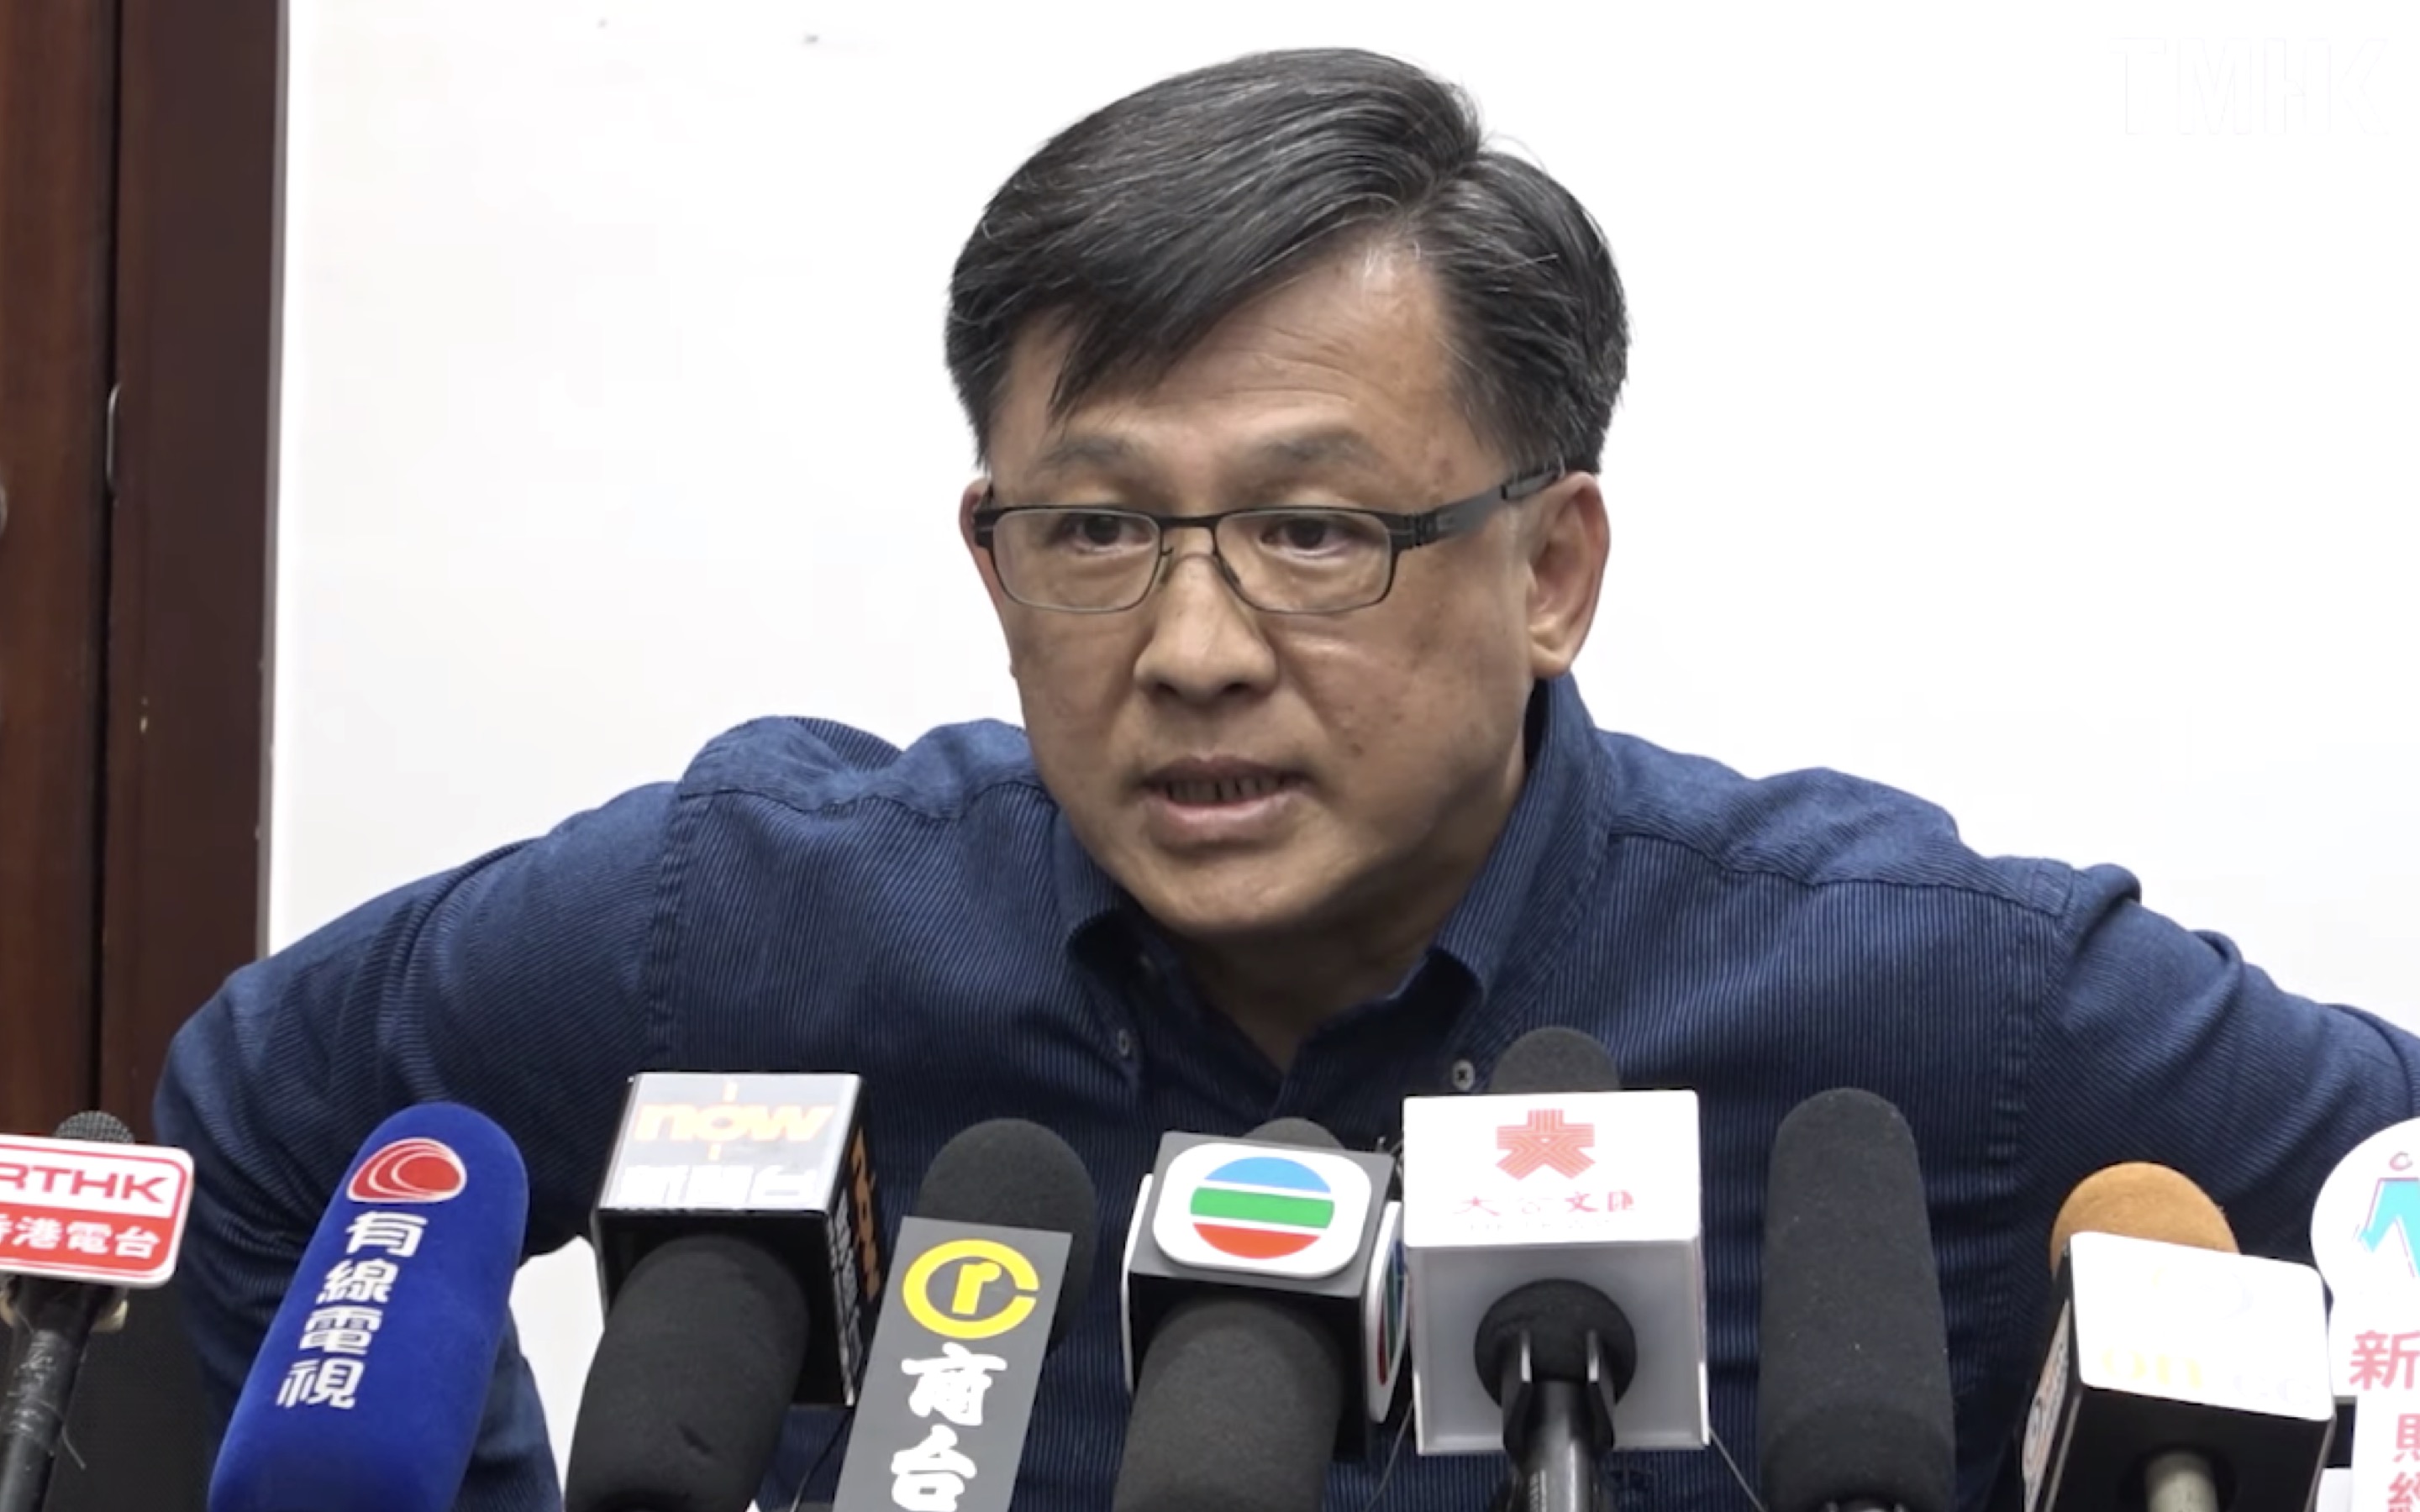 Pro-Beijing lawmaker Junius Ho at a press conference on July 22 where he denied being involved with an indiscriminate attack on pro-democracy supporters, commuters and journalists at Yuen Long MTR station on July 21, 2019. Screengrab via YouTube.